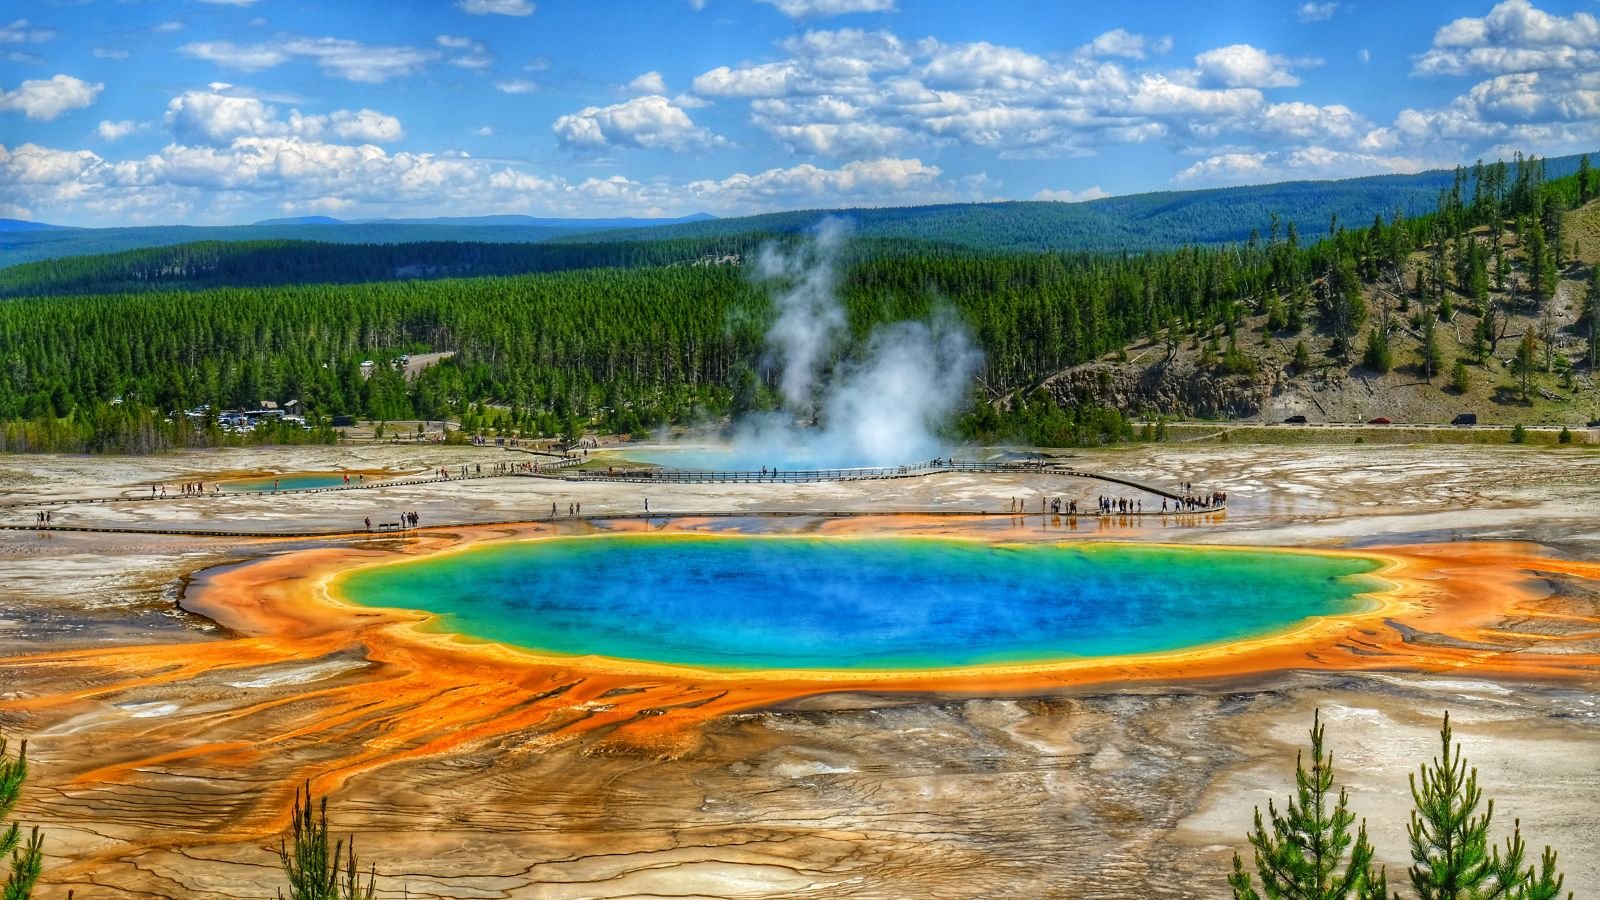 <p>The Grand Prismatic Spring is known as the largest hot spring in the United States. Due to the bright colors, the spring resembles a giant rainbow-colored circle. It’s one of the most beautiful spots in the park, and many visitors consider it a must-see if they visit Yellowstone.</p>